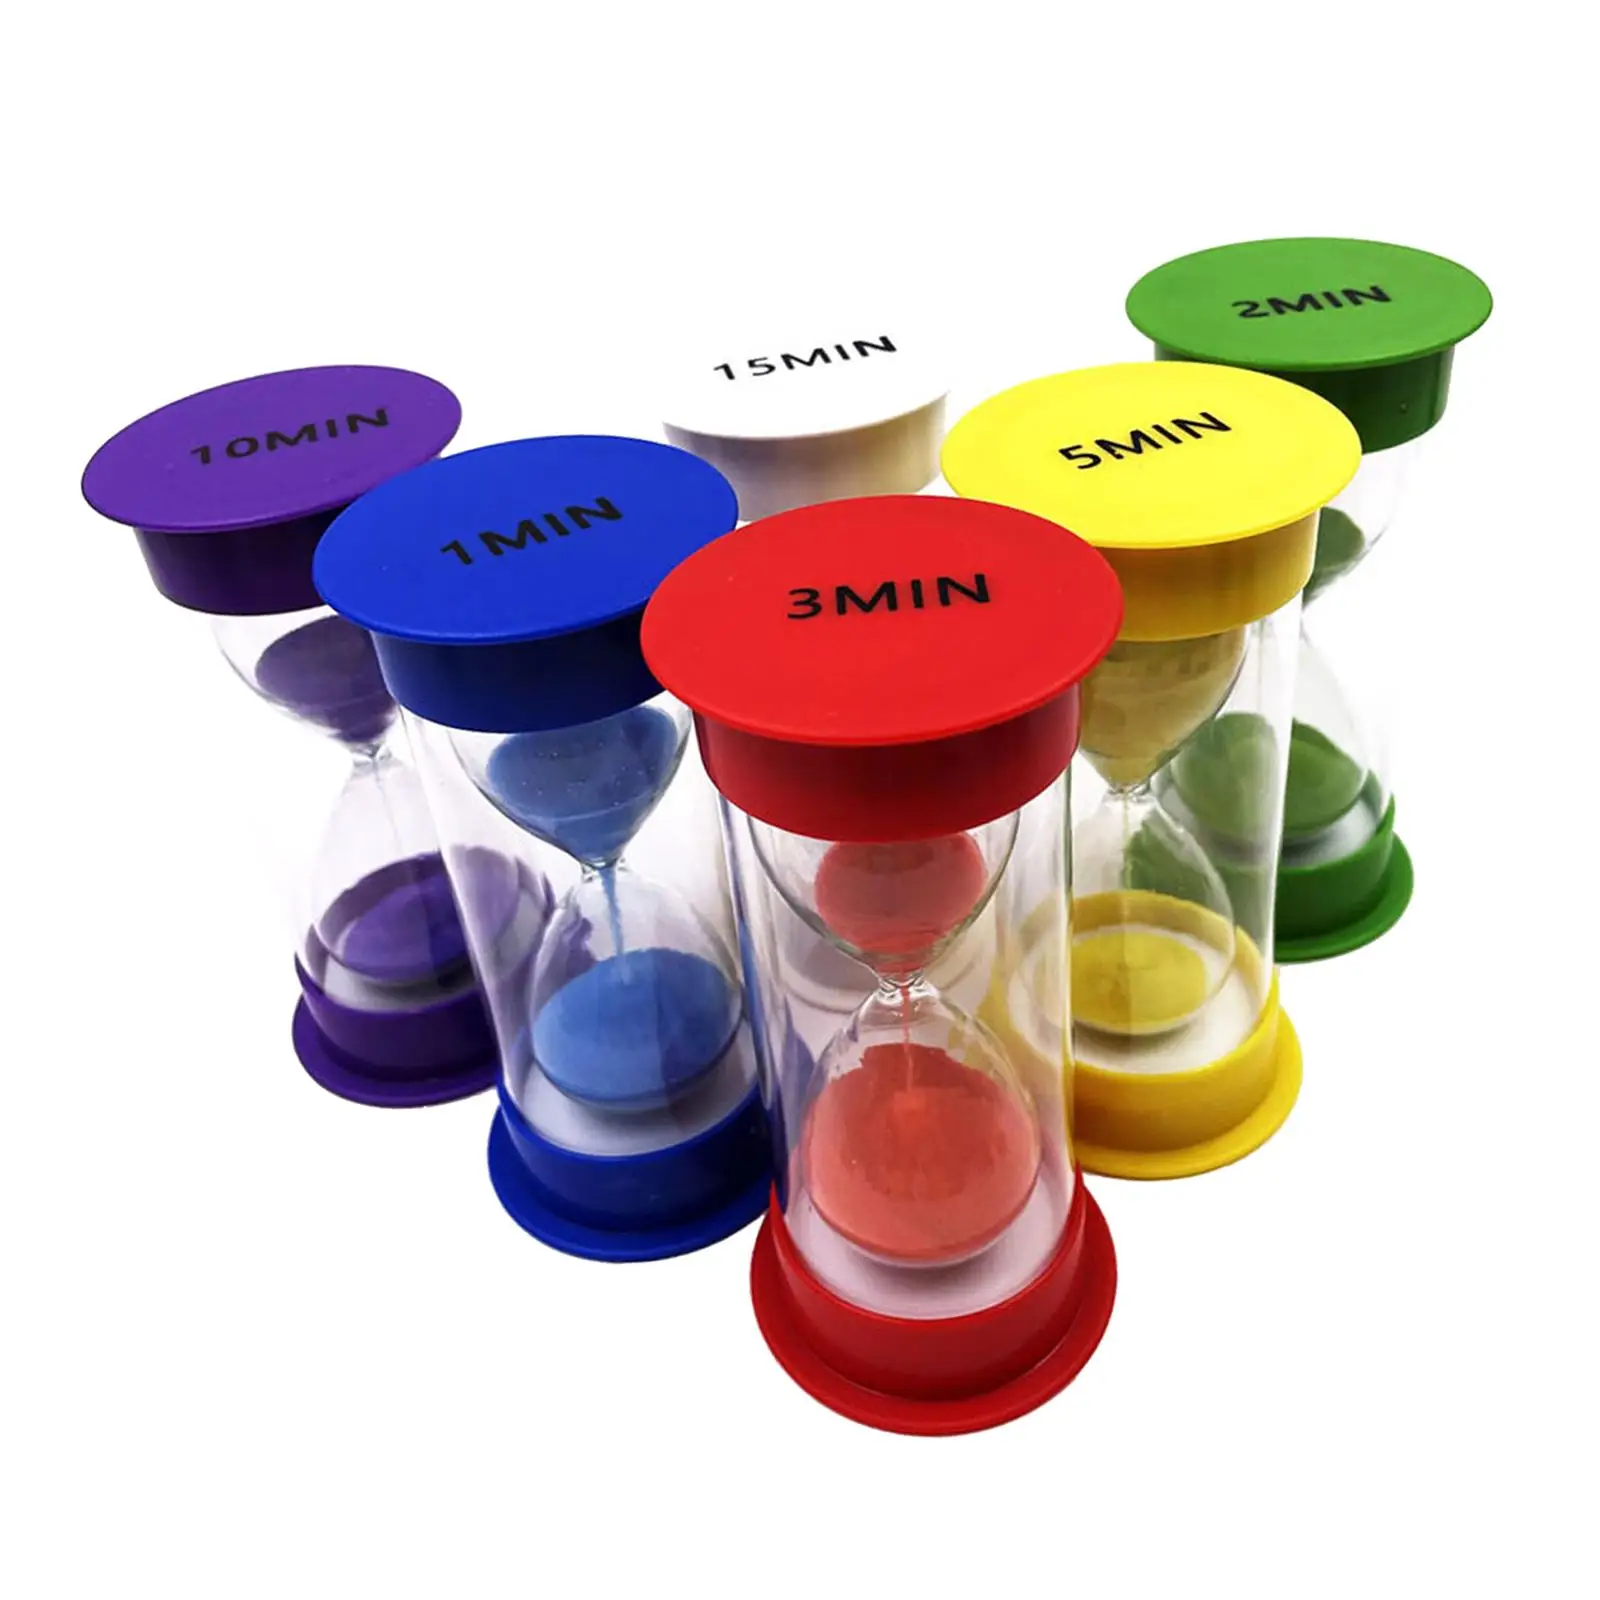 6x Sandglass Timer Colorful Portable Visual Sand Clock Timer Sand Hourglass Timer for Room Reading Restaurant Cooking